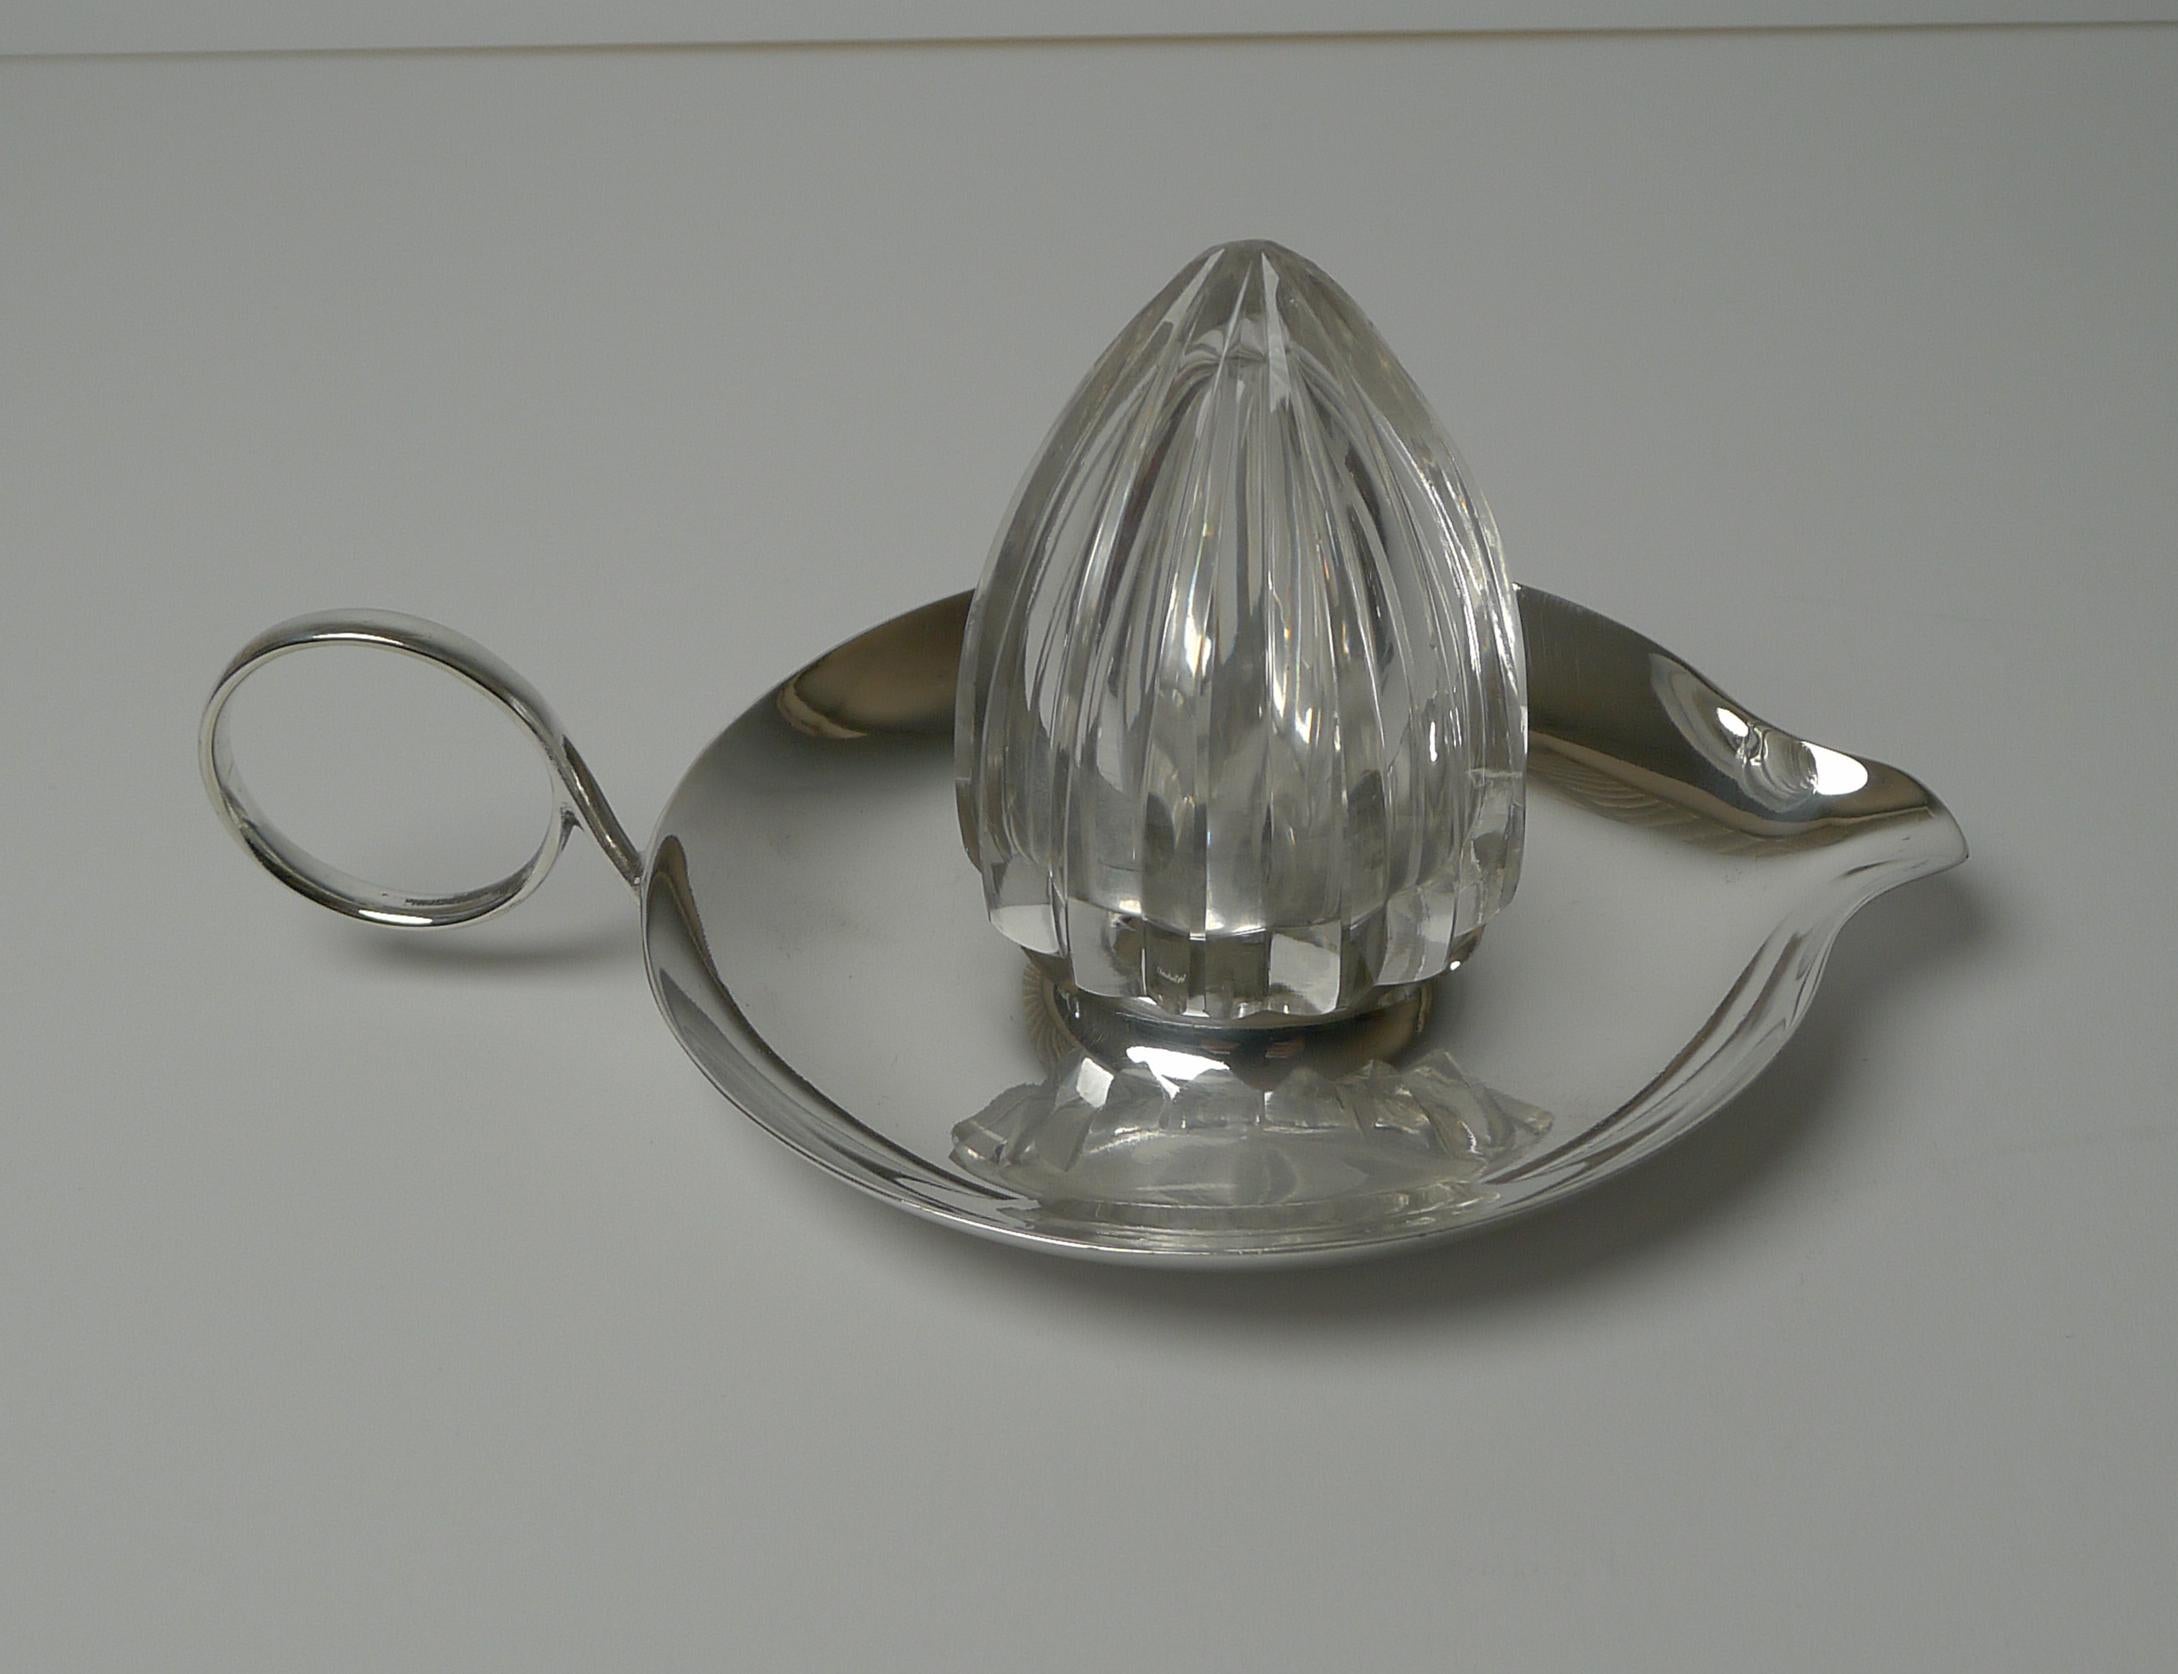 British Rare Antique Silver Plate and Cut Crystal Lemon Squeezer, c.1910 For Sale